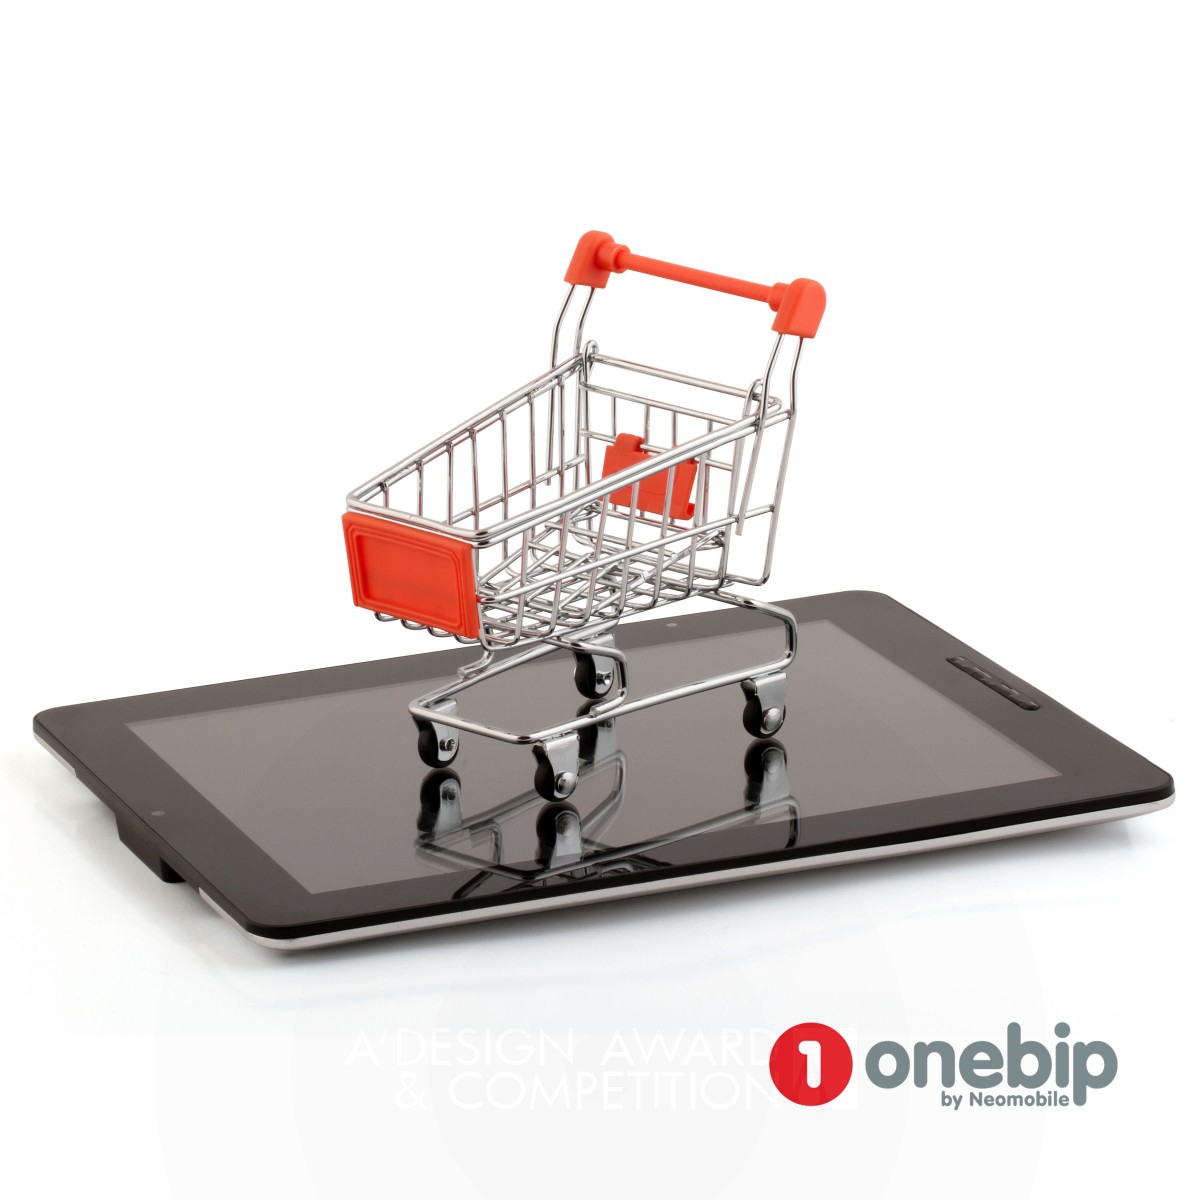 Onebip by Neomobile Subscription Payment System